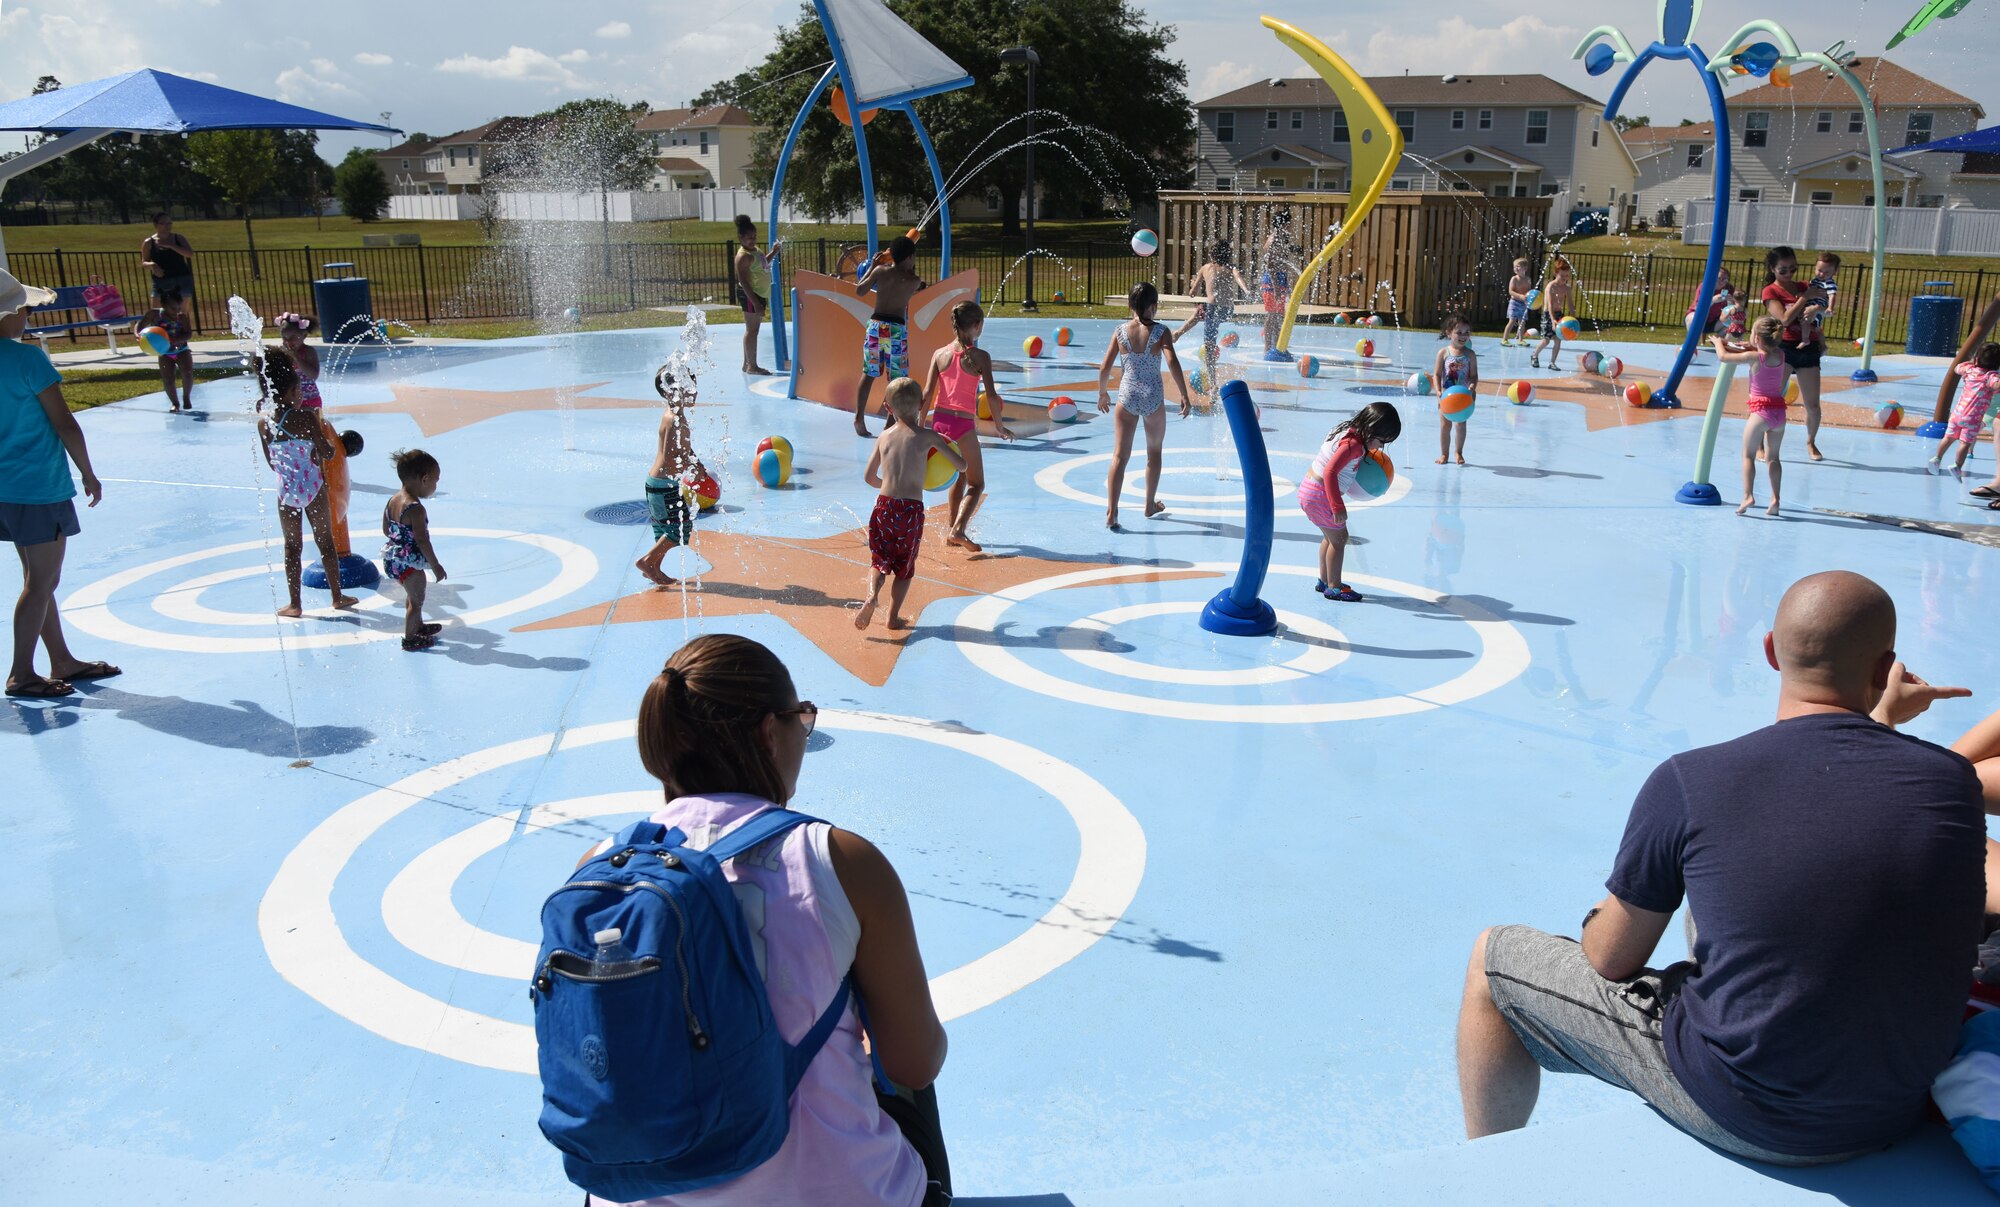 Military children play on the splash pad during the Splash Pad Ribbon Cutting Ceremony at the West Falcon Housing area in Biloxi, Mississippi, May 22, 2018. The Hunt Company project will provide more recreational activities for all Keesler family housing families. (U.S. Air Force photo by Kemberly Groue)